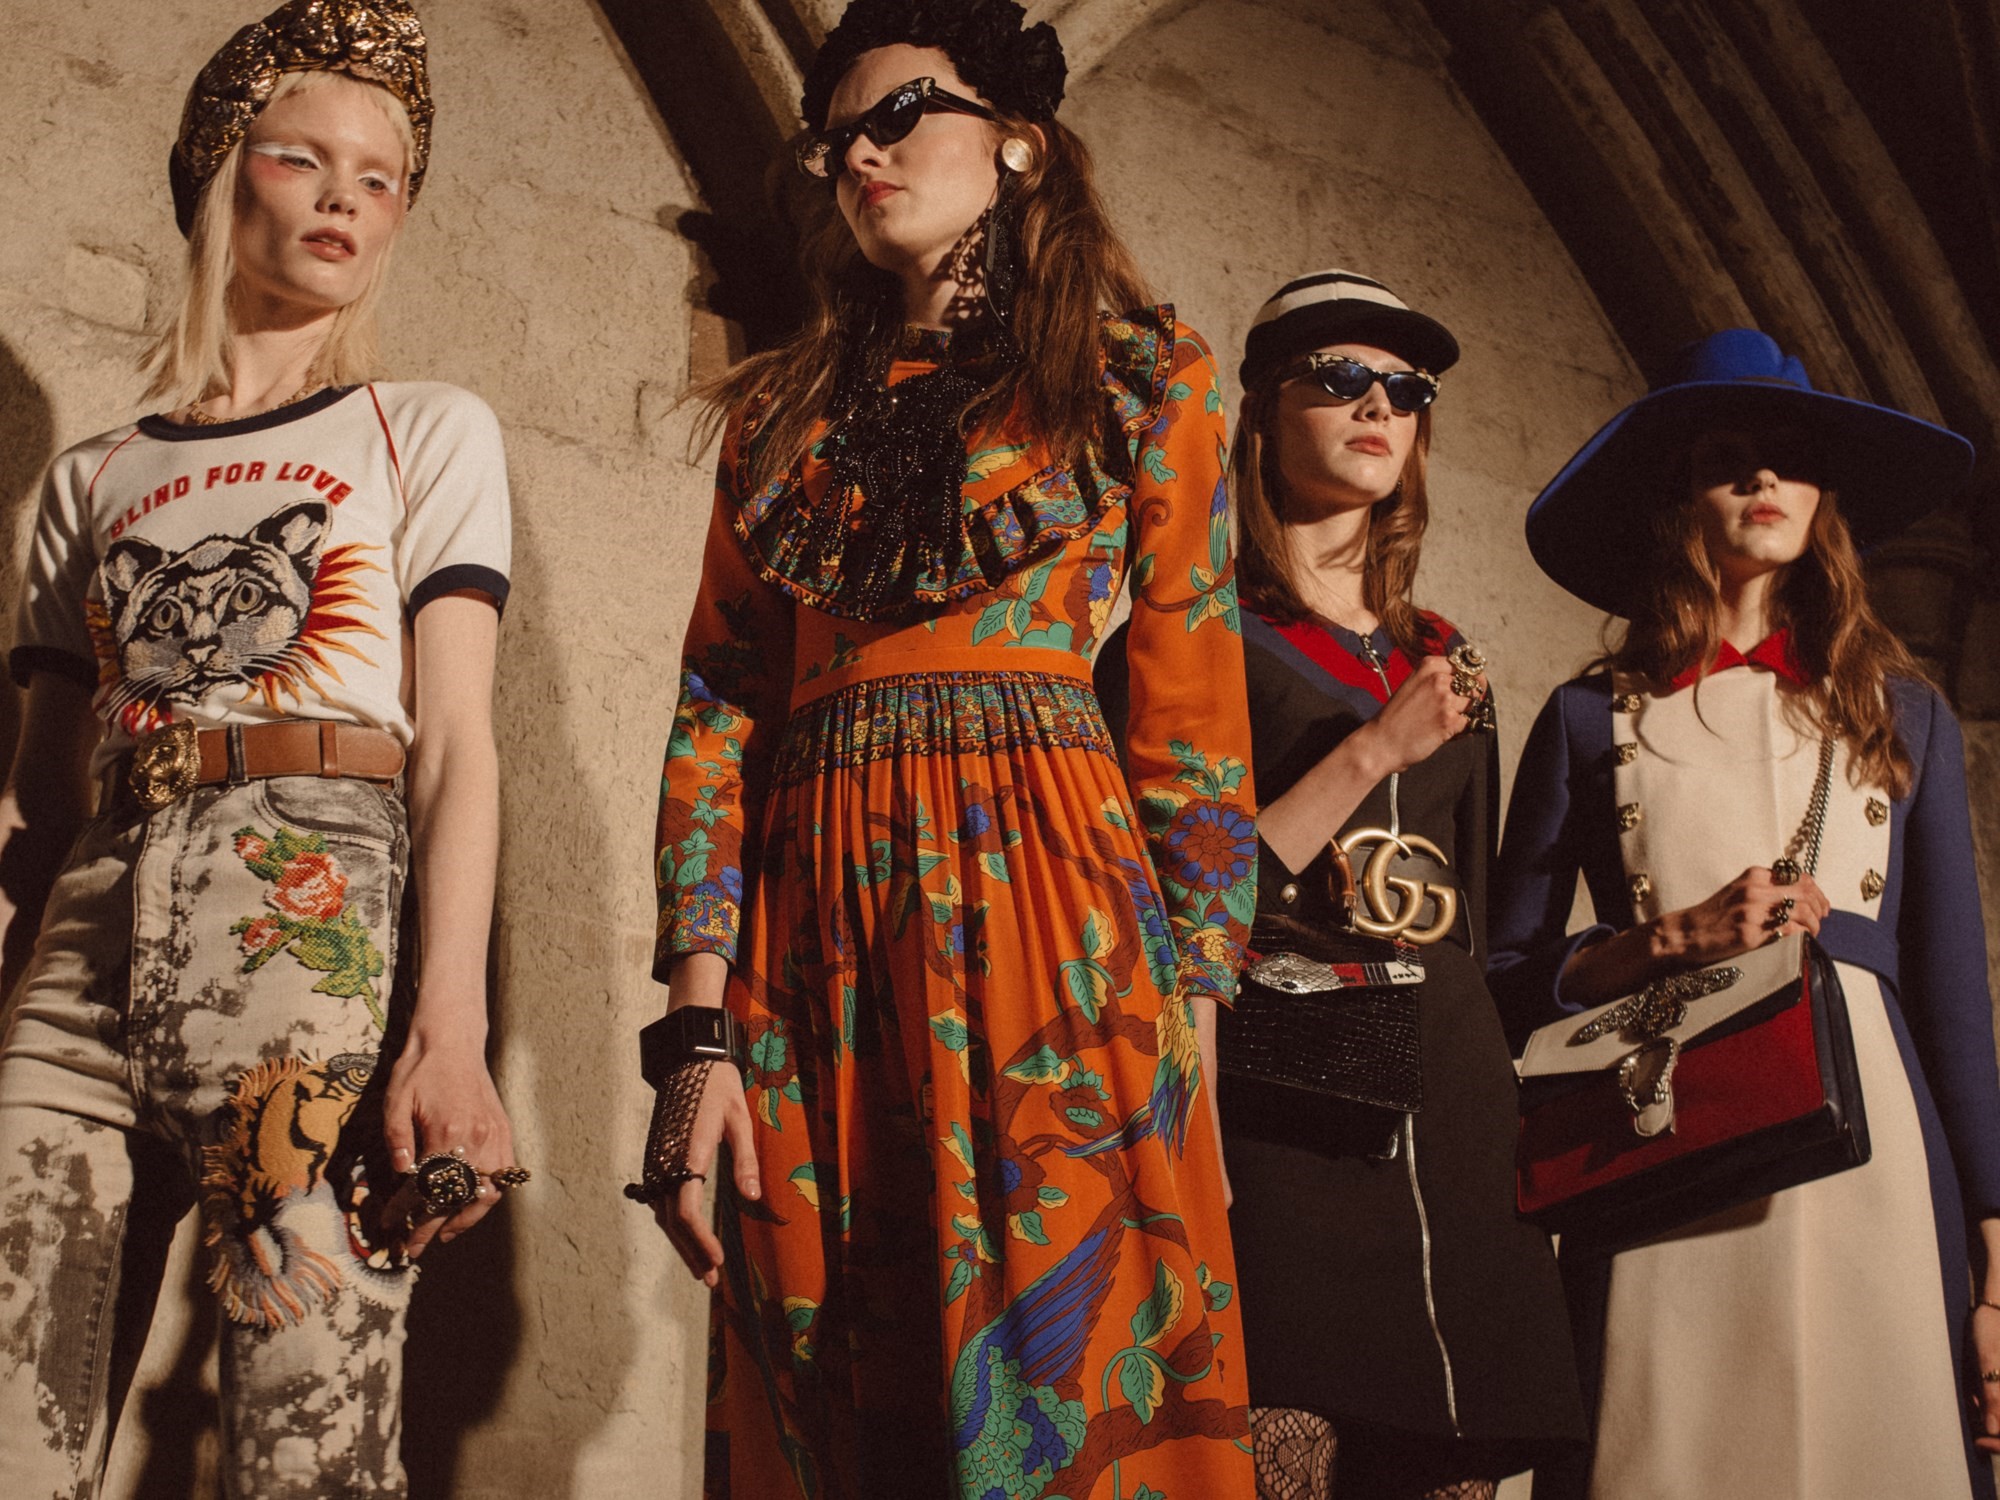 The Culture of Fashion Subcultures